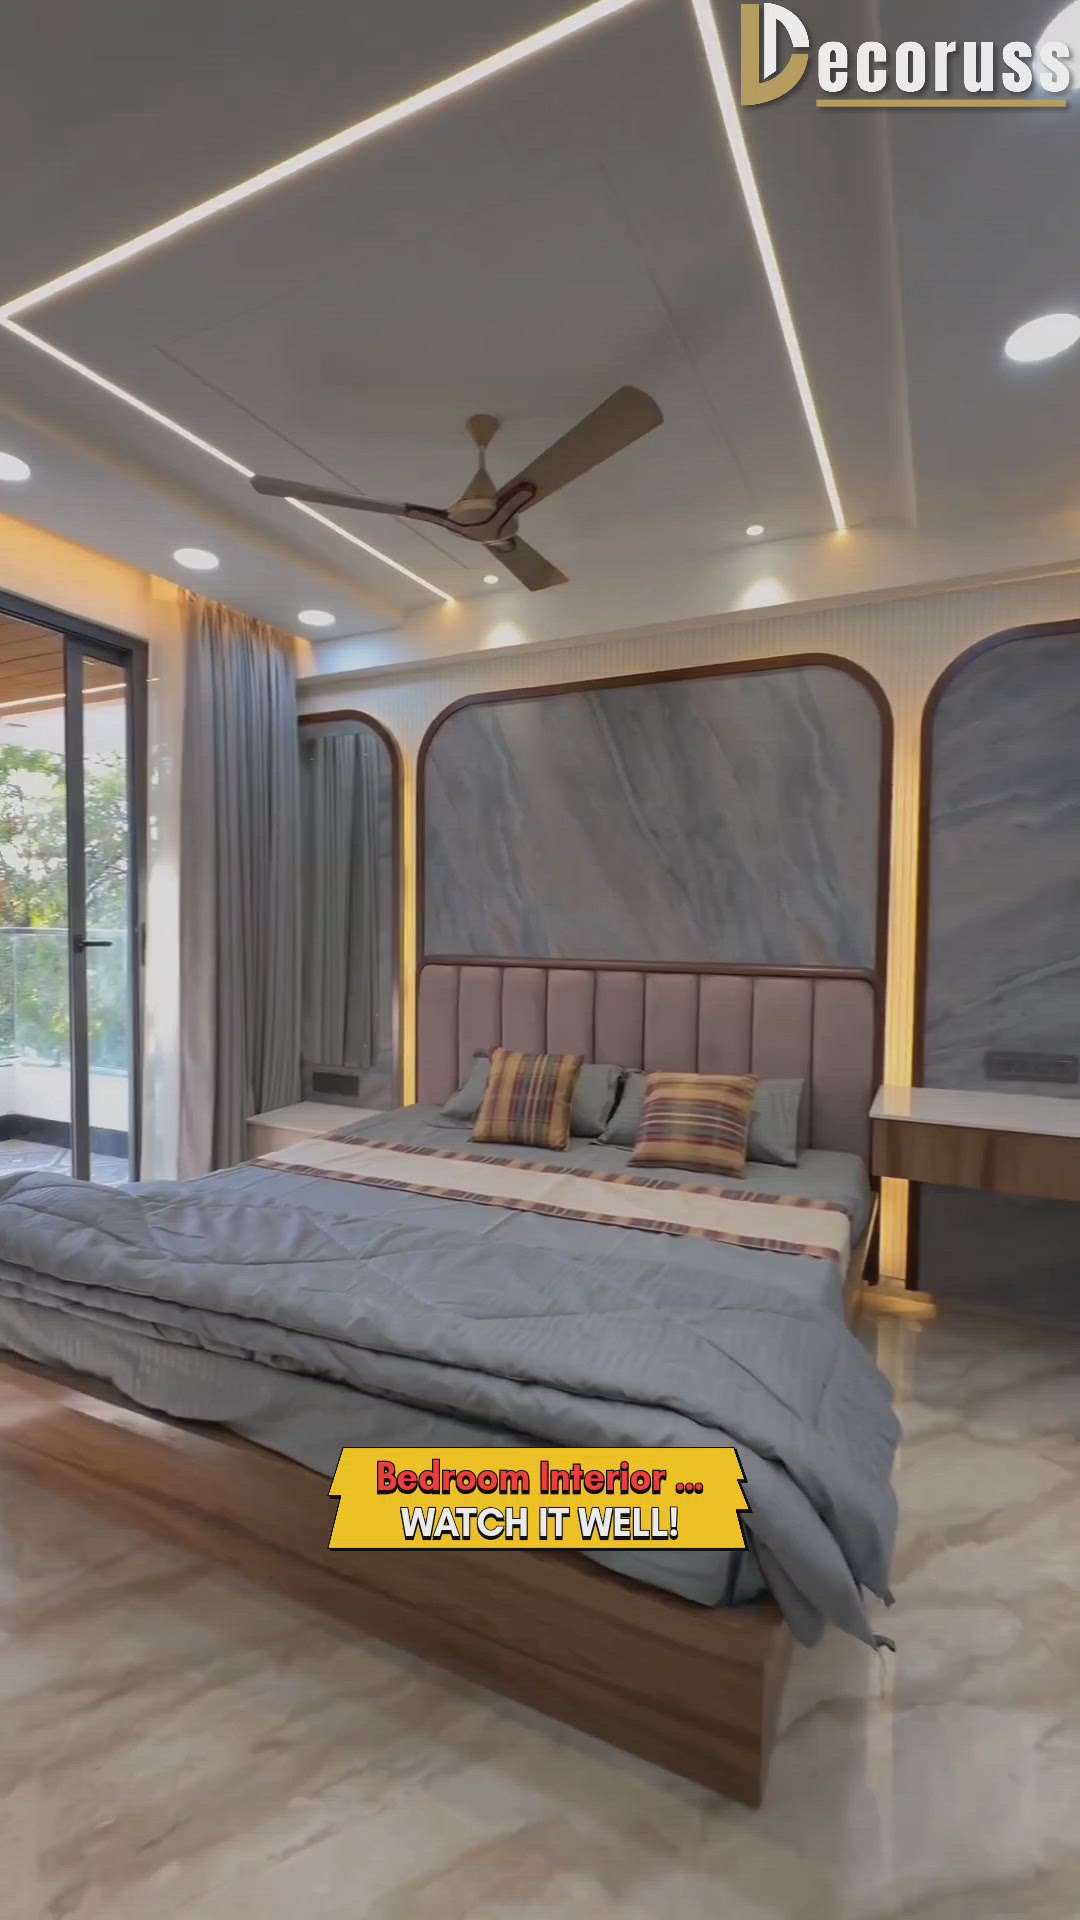 Bedroom interior design shorts 😍 | Bedroom Interior Decor Shots 🔥| Modern bedroom interior designing | Decoruss - one of the best interior designers and architects of Lucknow U.P.

Renovate your bedroom with the latest bedroom interior design ideas from Decoruss, "the best bedroom interior designer in Lucknow." A stylish modern TV panel design, a sliding wardrobe, and a bed back panel design will add elegance to your bedroom interiors.

Also watch these videos:-
1) Modular kitchen material | Best Kitchen Materials in India | Ply vs HDHMR for Kitchen | WPC vs HDHMR- https://youtu.be/ArGODWZsW4A

2) Home Tour 2023 | 3BHK Flat Interior Design Work | Decoruss | Best Home Interior Designer in Lucknow- https://youtu.be/STvUQT1QBmY

3) Simple Bedroom Interio Design Shorts by Decoruss https://youtube.com/shorts/bzCWaJ9YA1Y?feature=share
---------------------------------------------------------
For More Information Please contact us:- 
 #BedroomDesigns #bedroominteriordesign